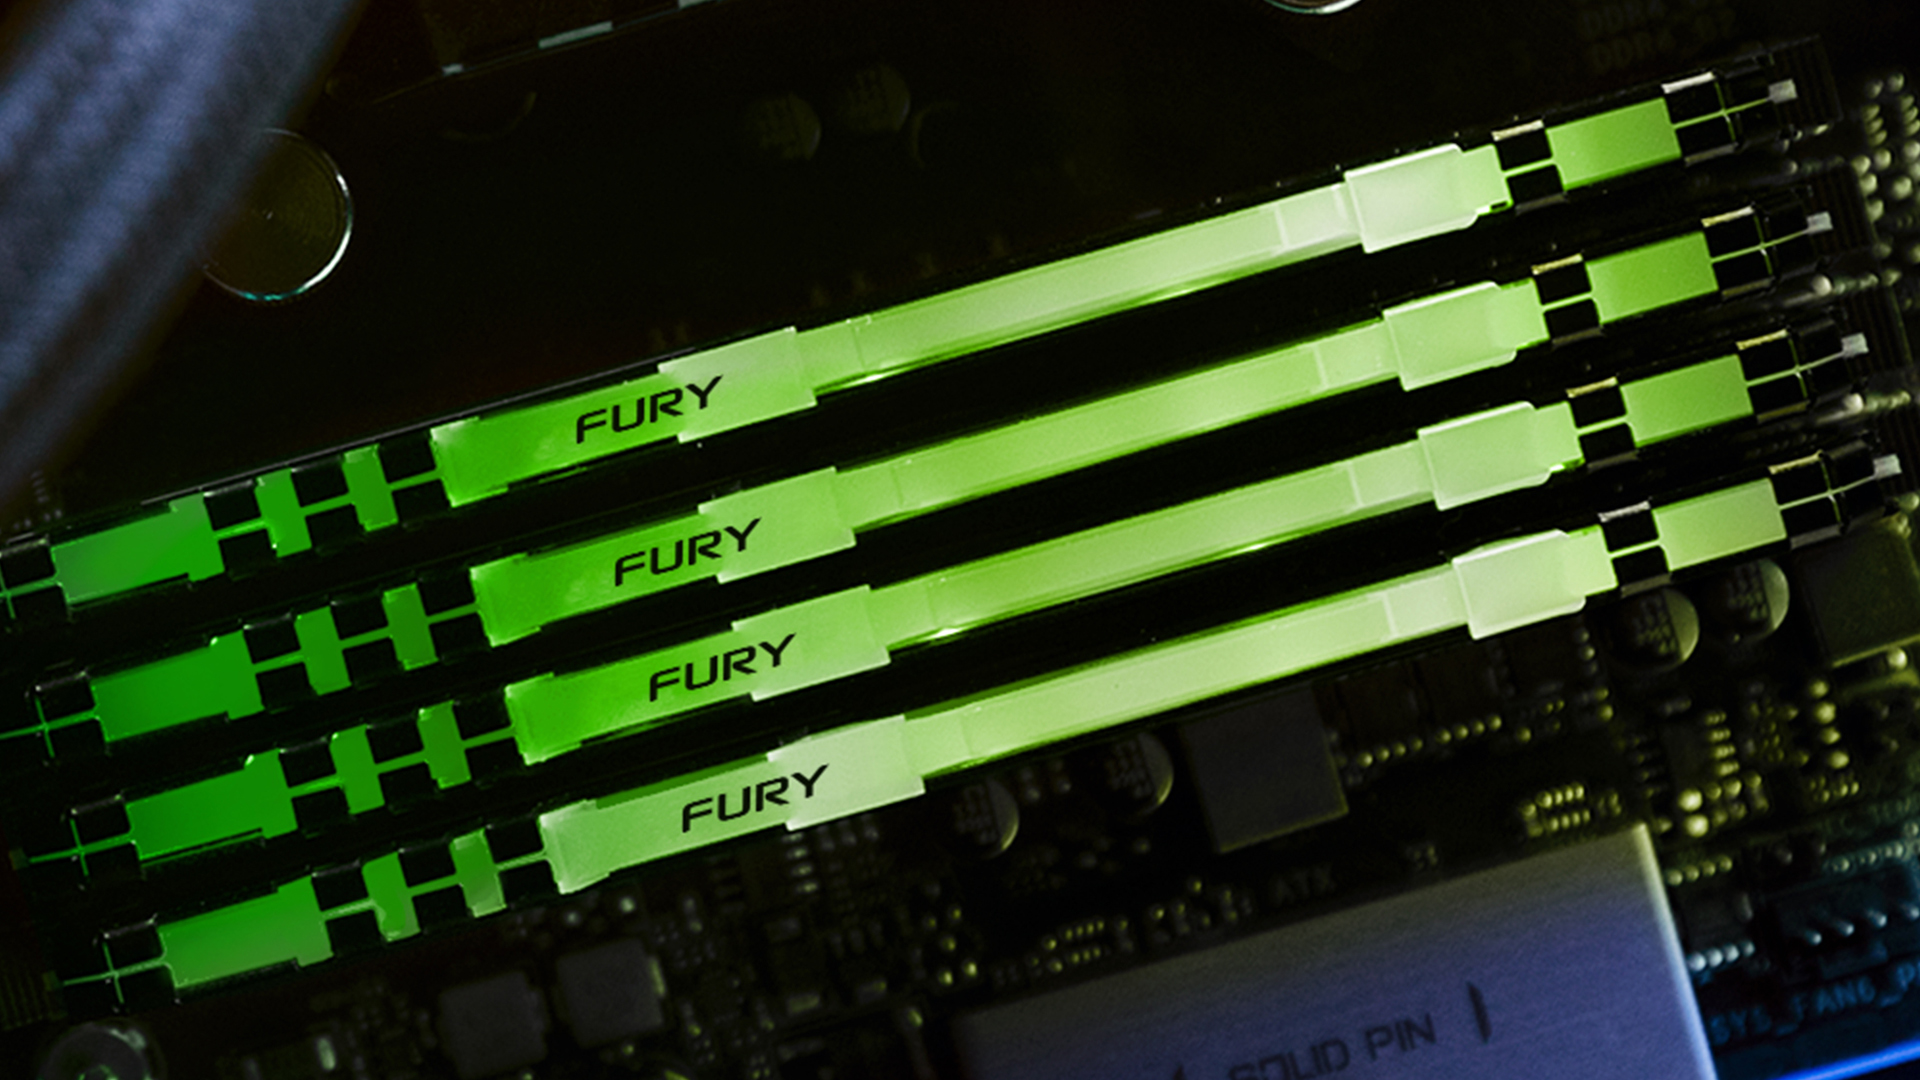 You are currently viewing Kingston’s latest range of DDR4 FURY RAM kits has been unleashed